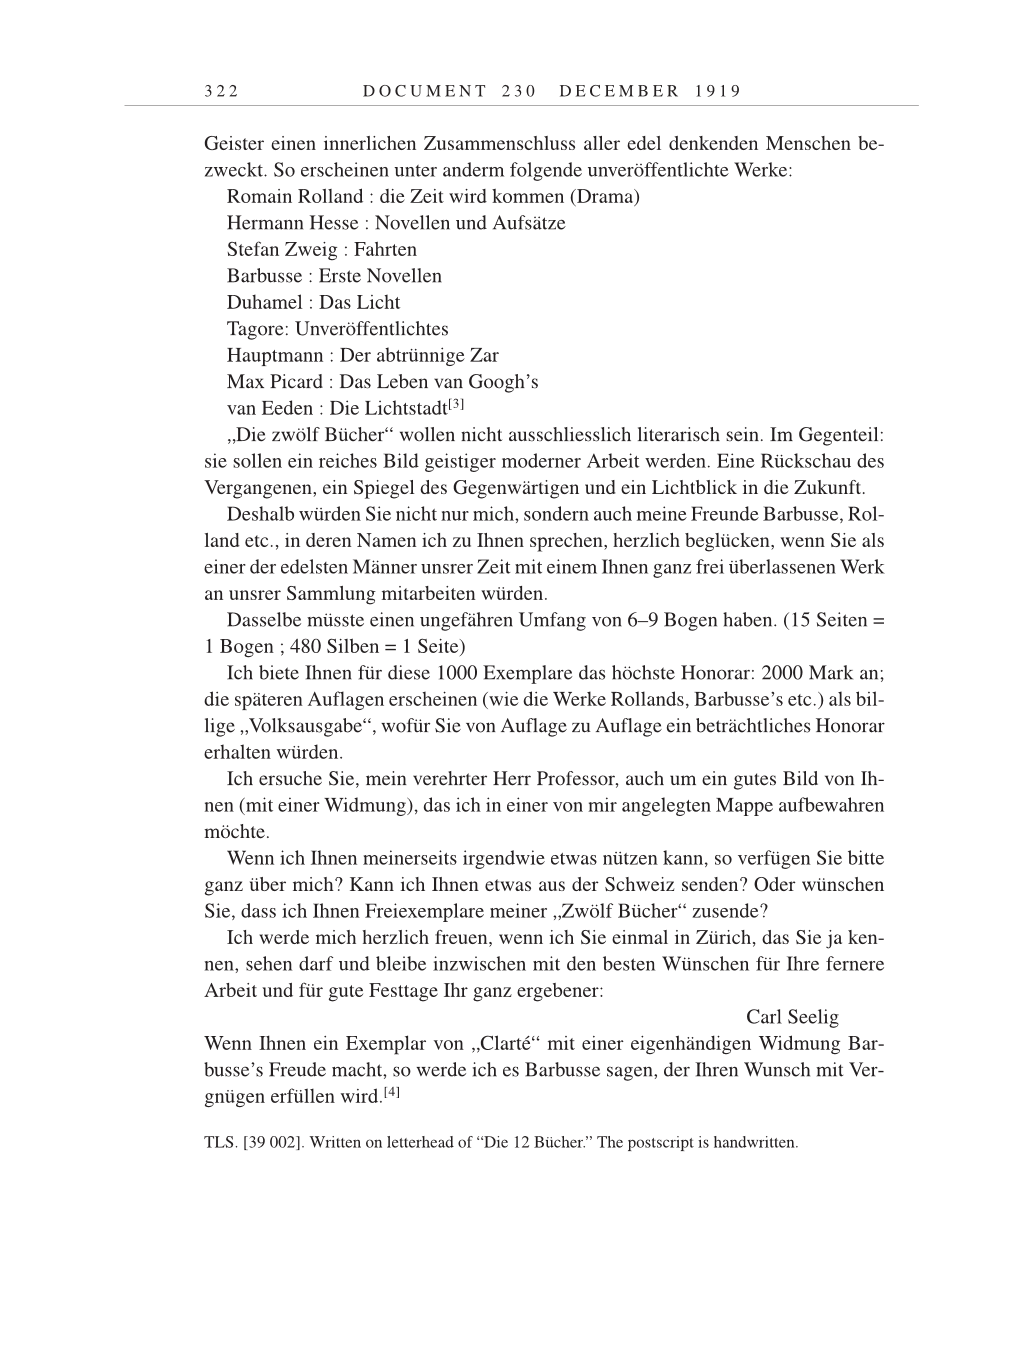 Volume 9: The Berlin Years: Correspondence January 1919-April 1920 page 322